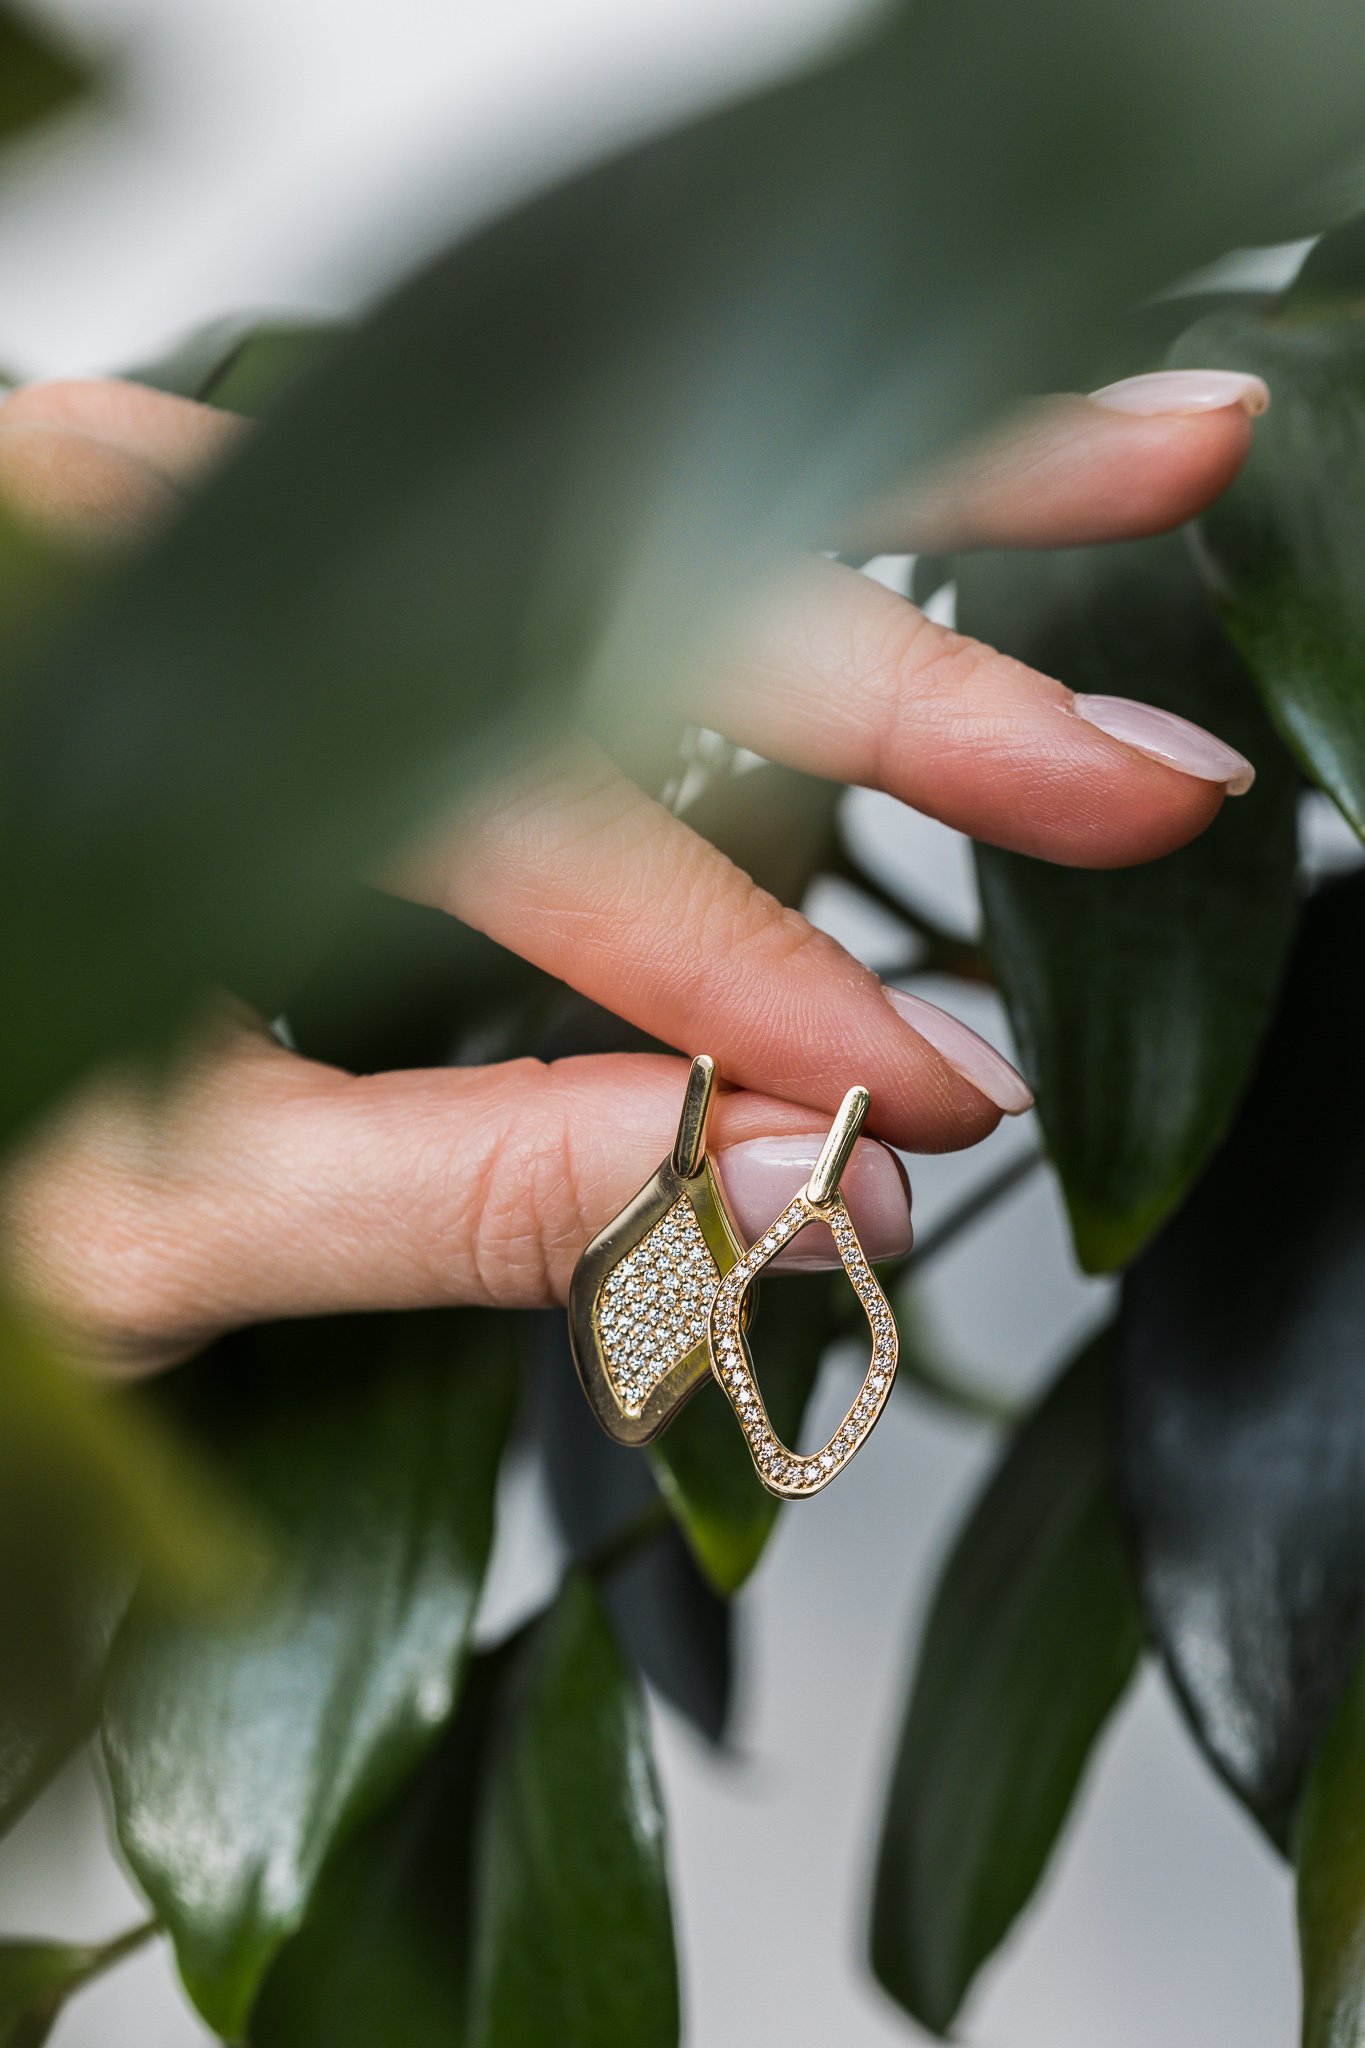 Canberra product photography - hands hold earrings